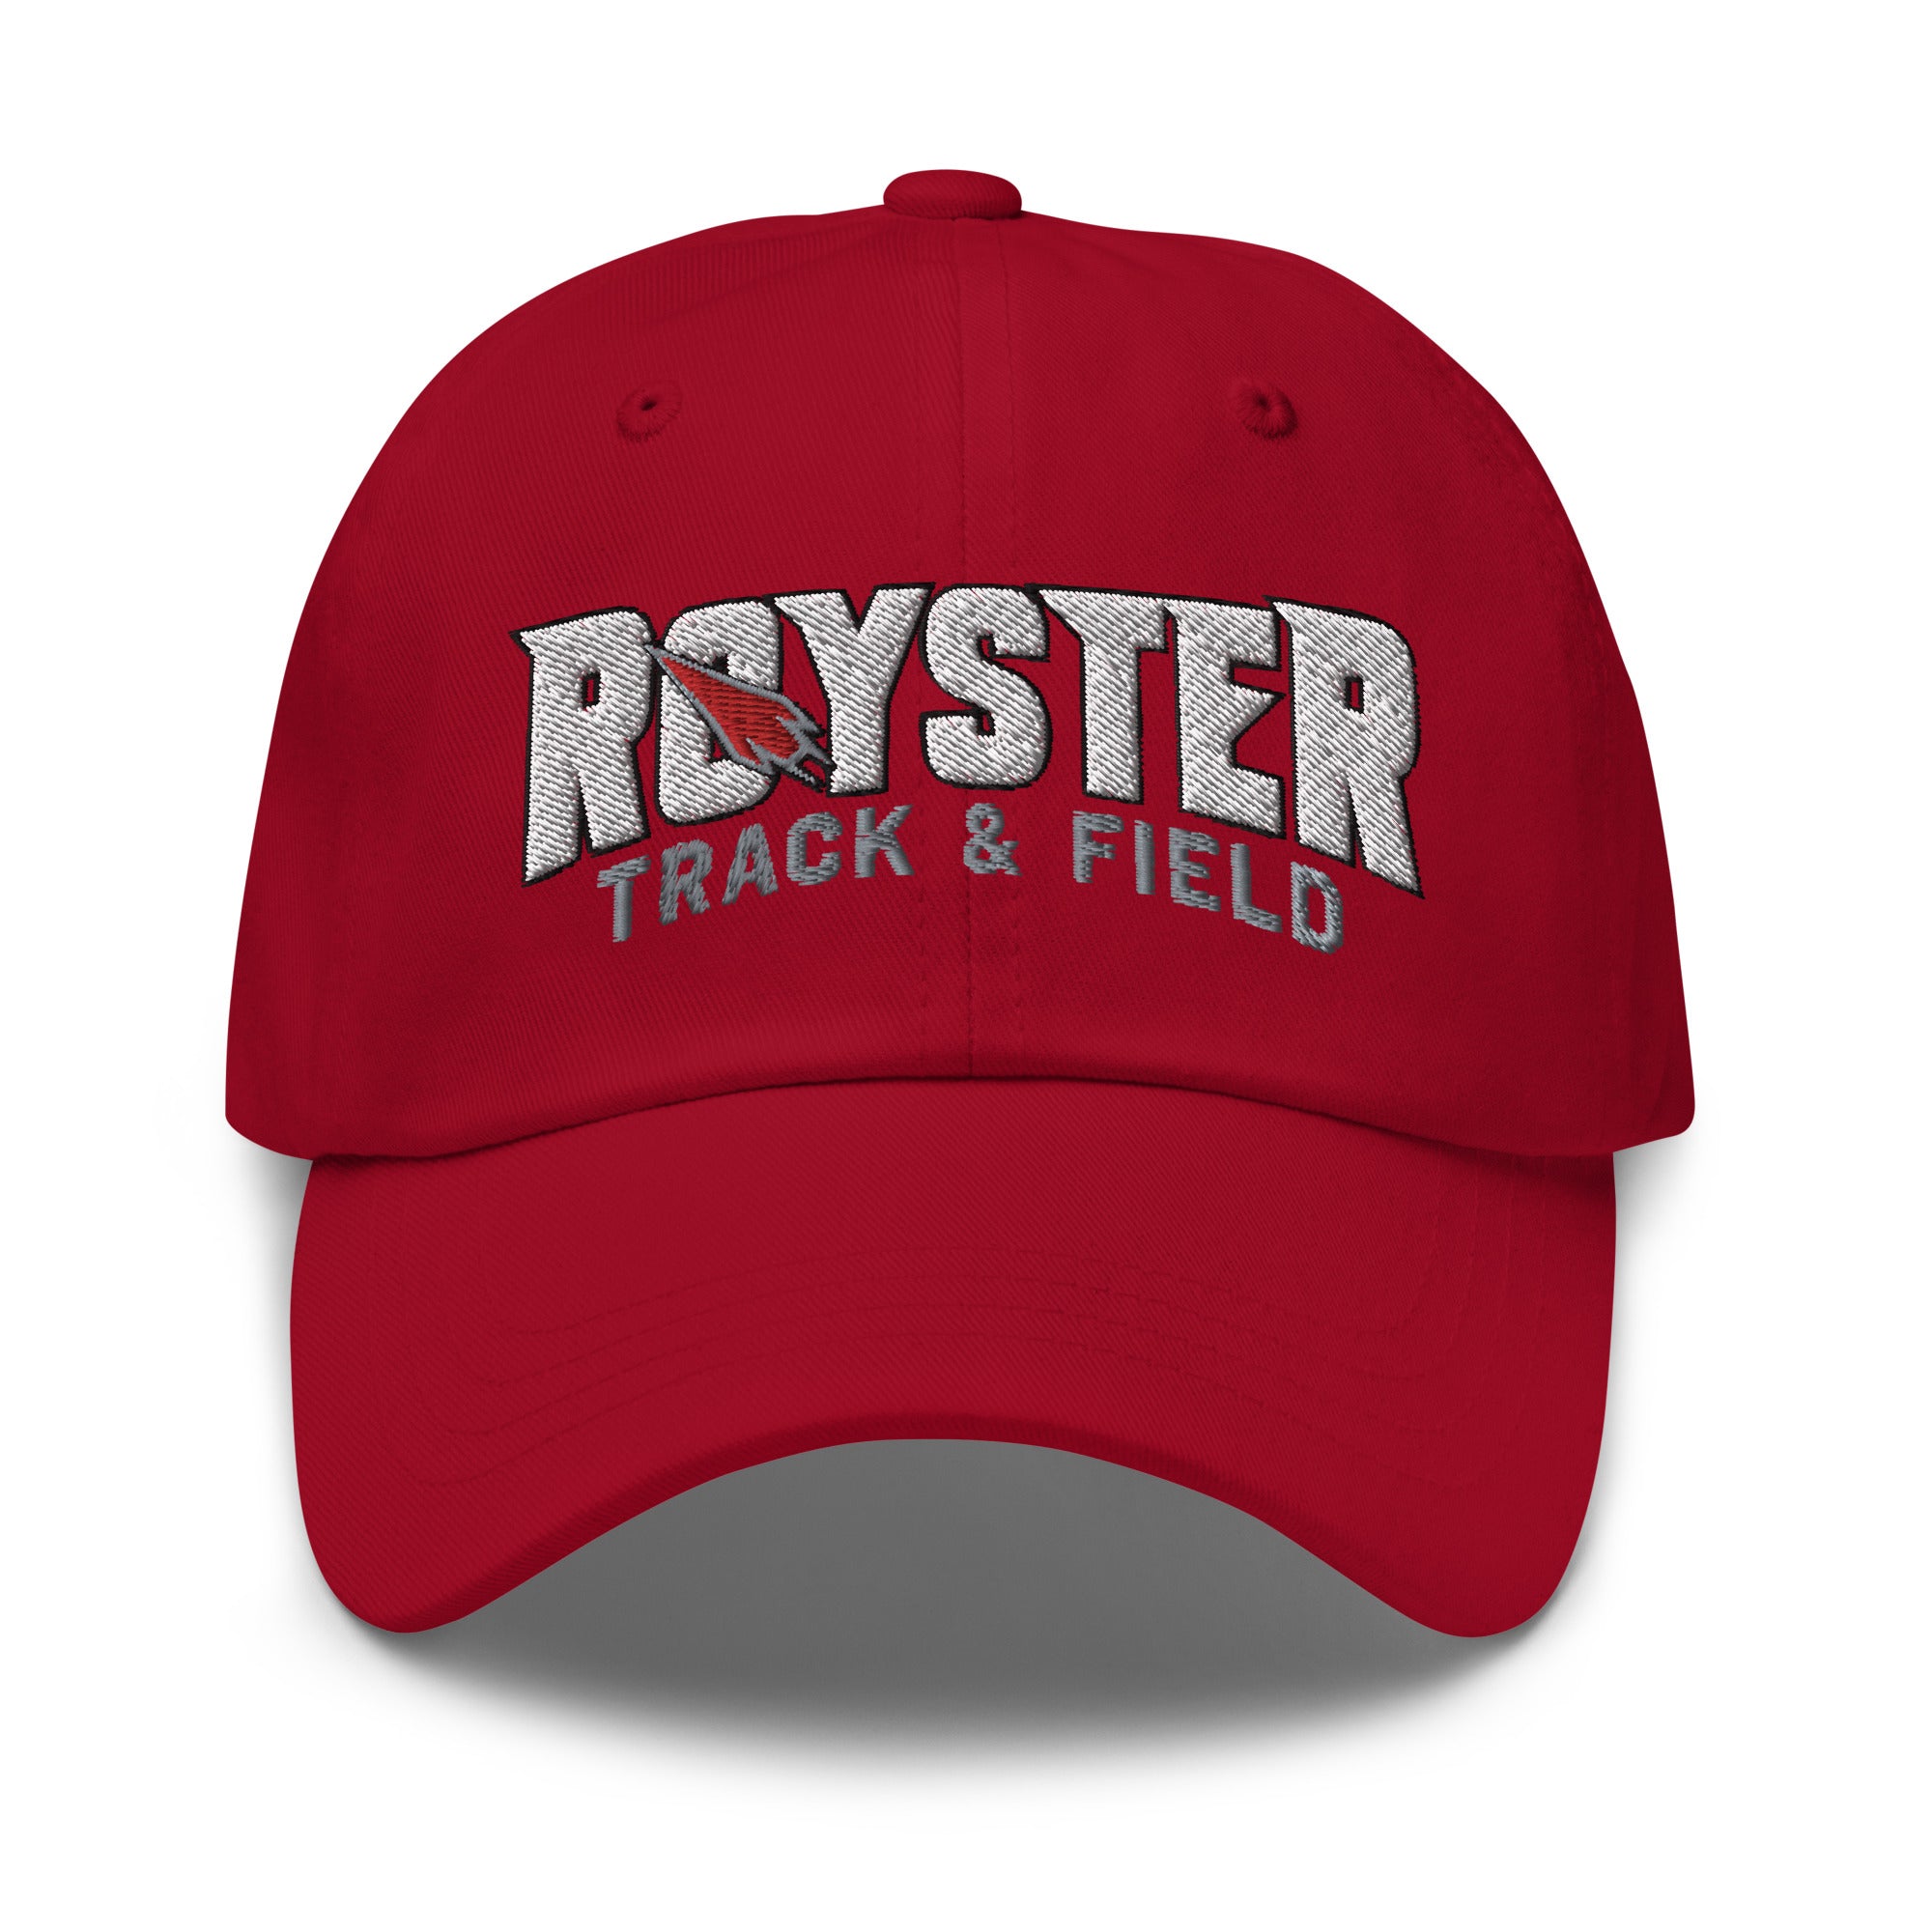 Royster Rockets Track & Field Classic Dad Hat